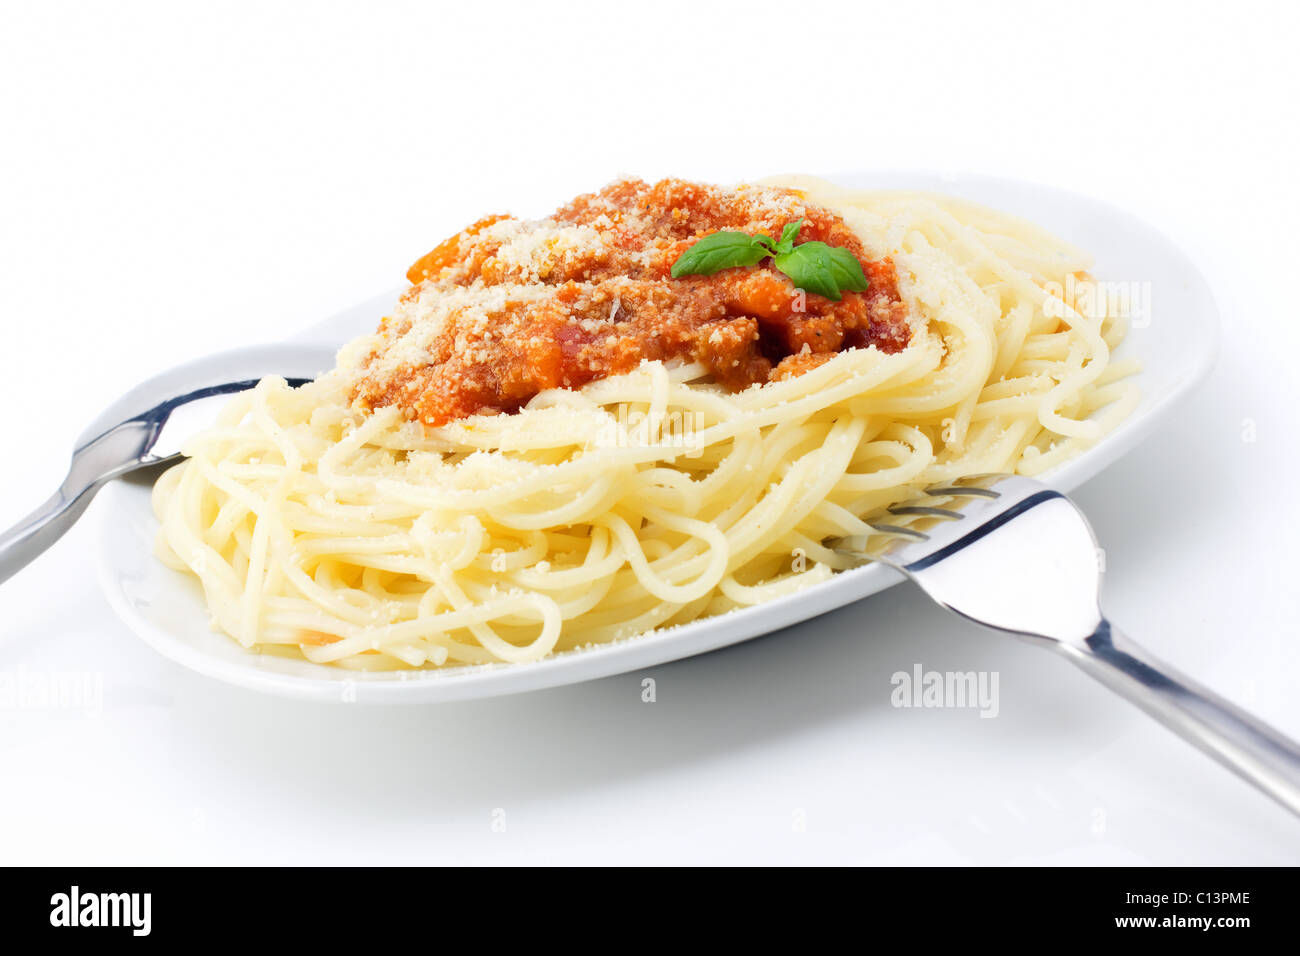 Spaghetti bolognese with parmesan cheese and basil Stock Photo